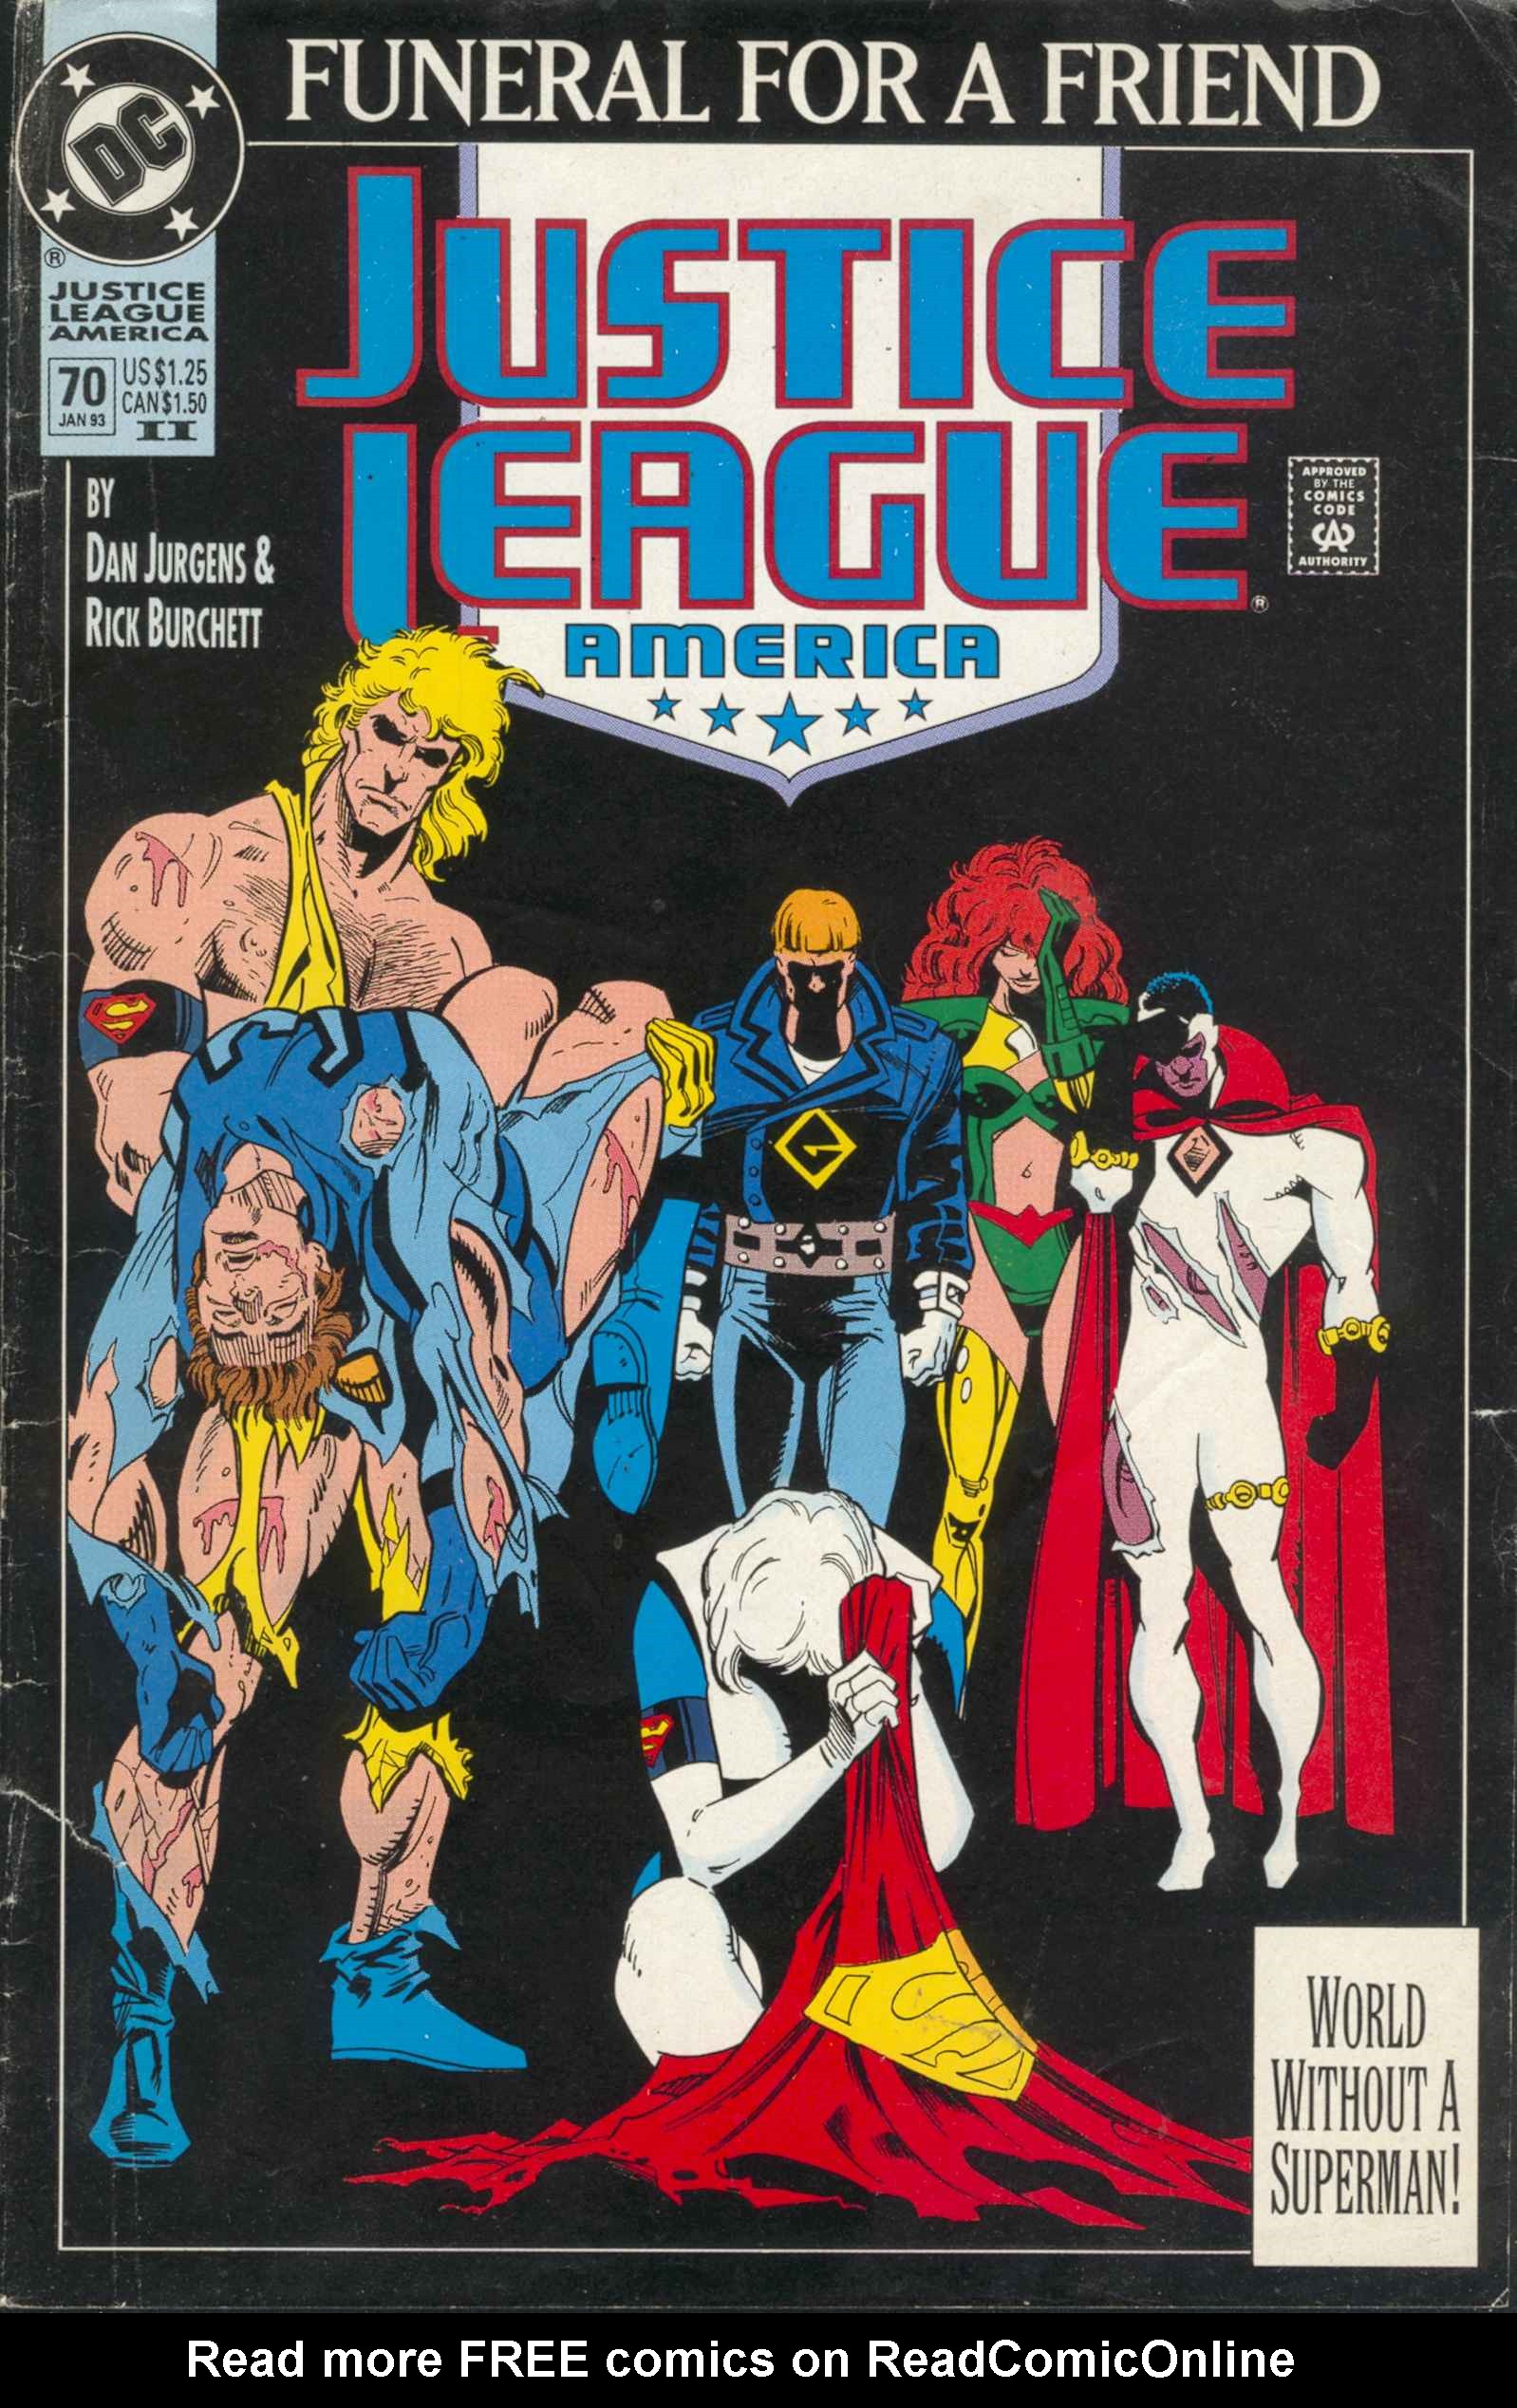 Read online Justice League America comic -  Issue #70 - 3